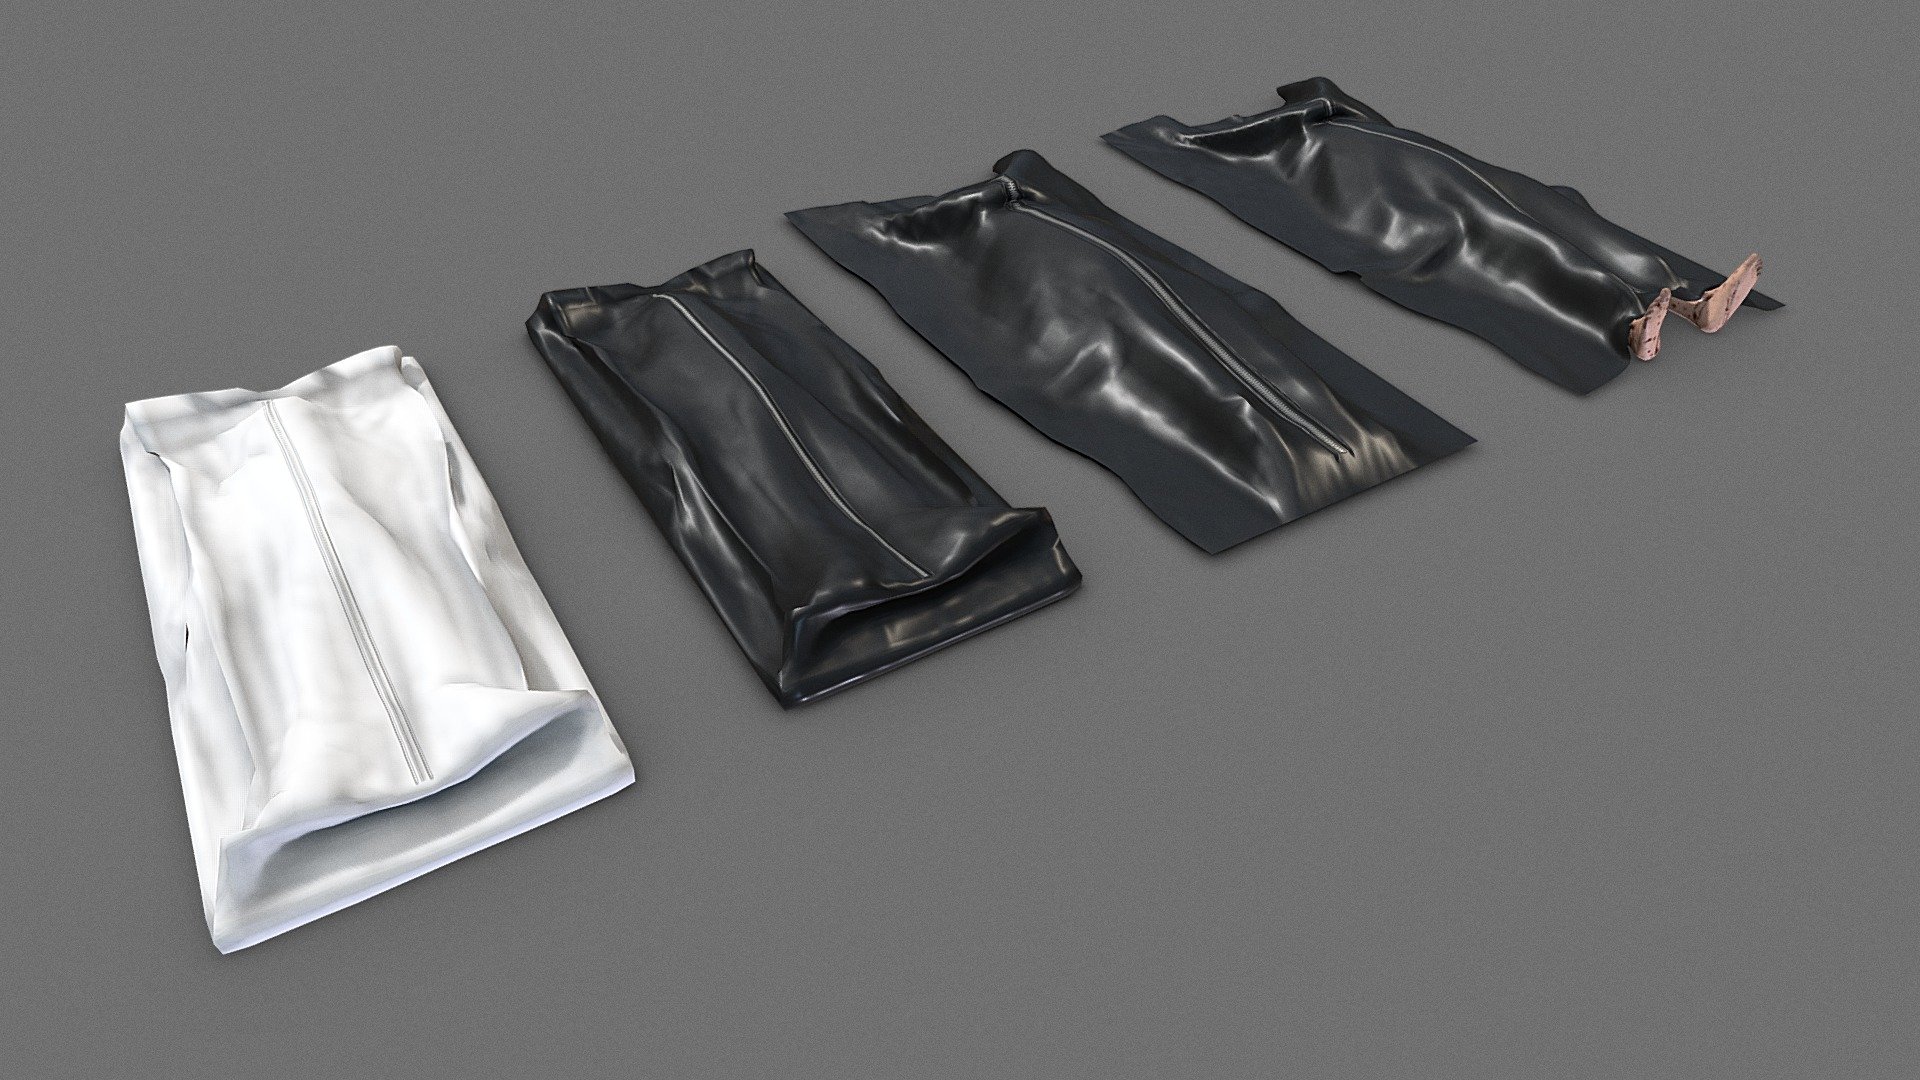 A collection of 4 bodybag variations to use any any sort of crime scene envronment. 

1x white plastic
2x black plastic
1x black plastic with bloody feet sticking out 

PBR textures @4k - Bodybag collection - Buy Royalty Free 3D model by Sousinho 3d model